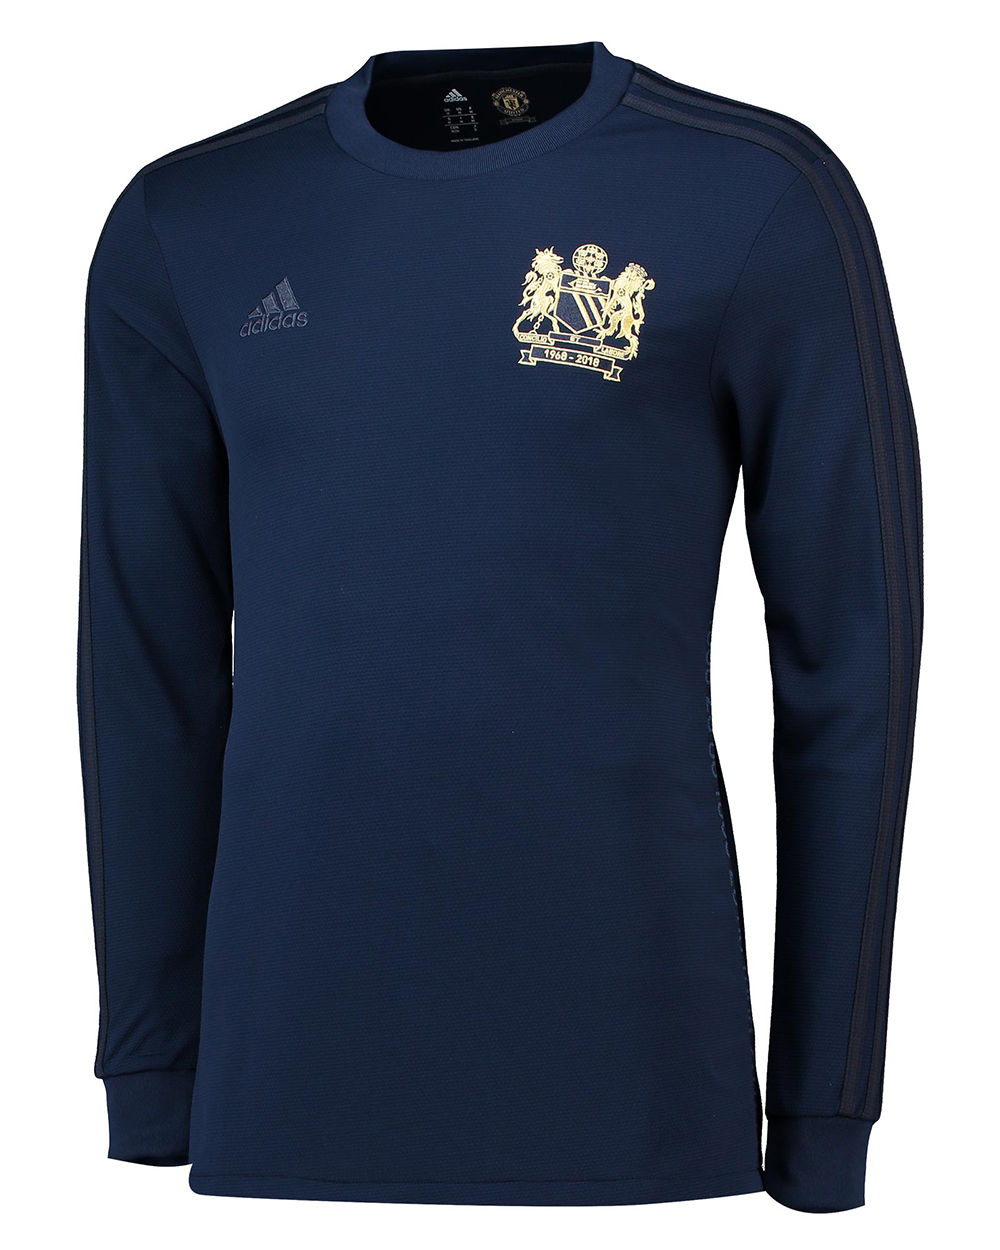 Manchester United adidas Special Kit European Cup 1968